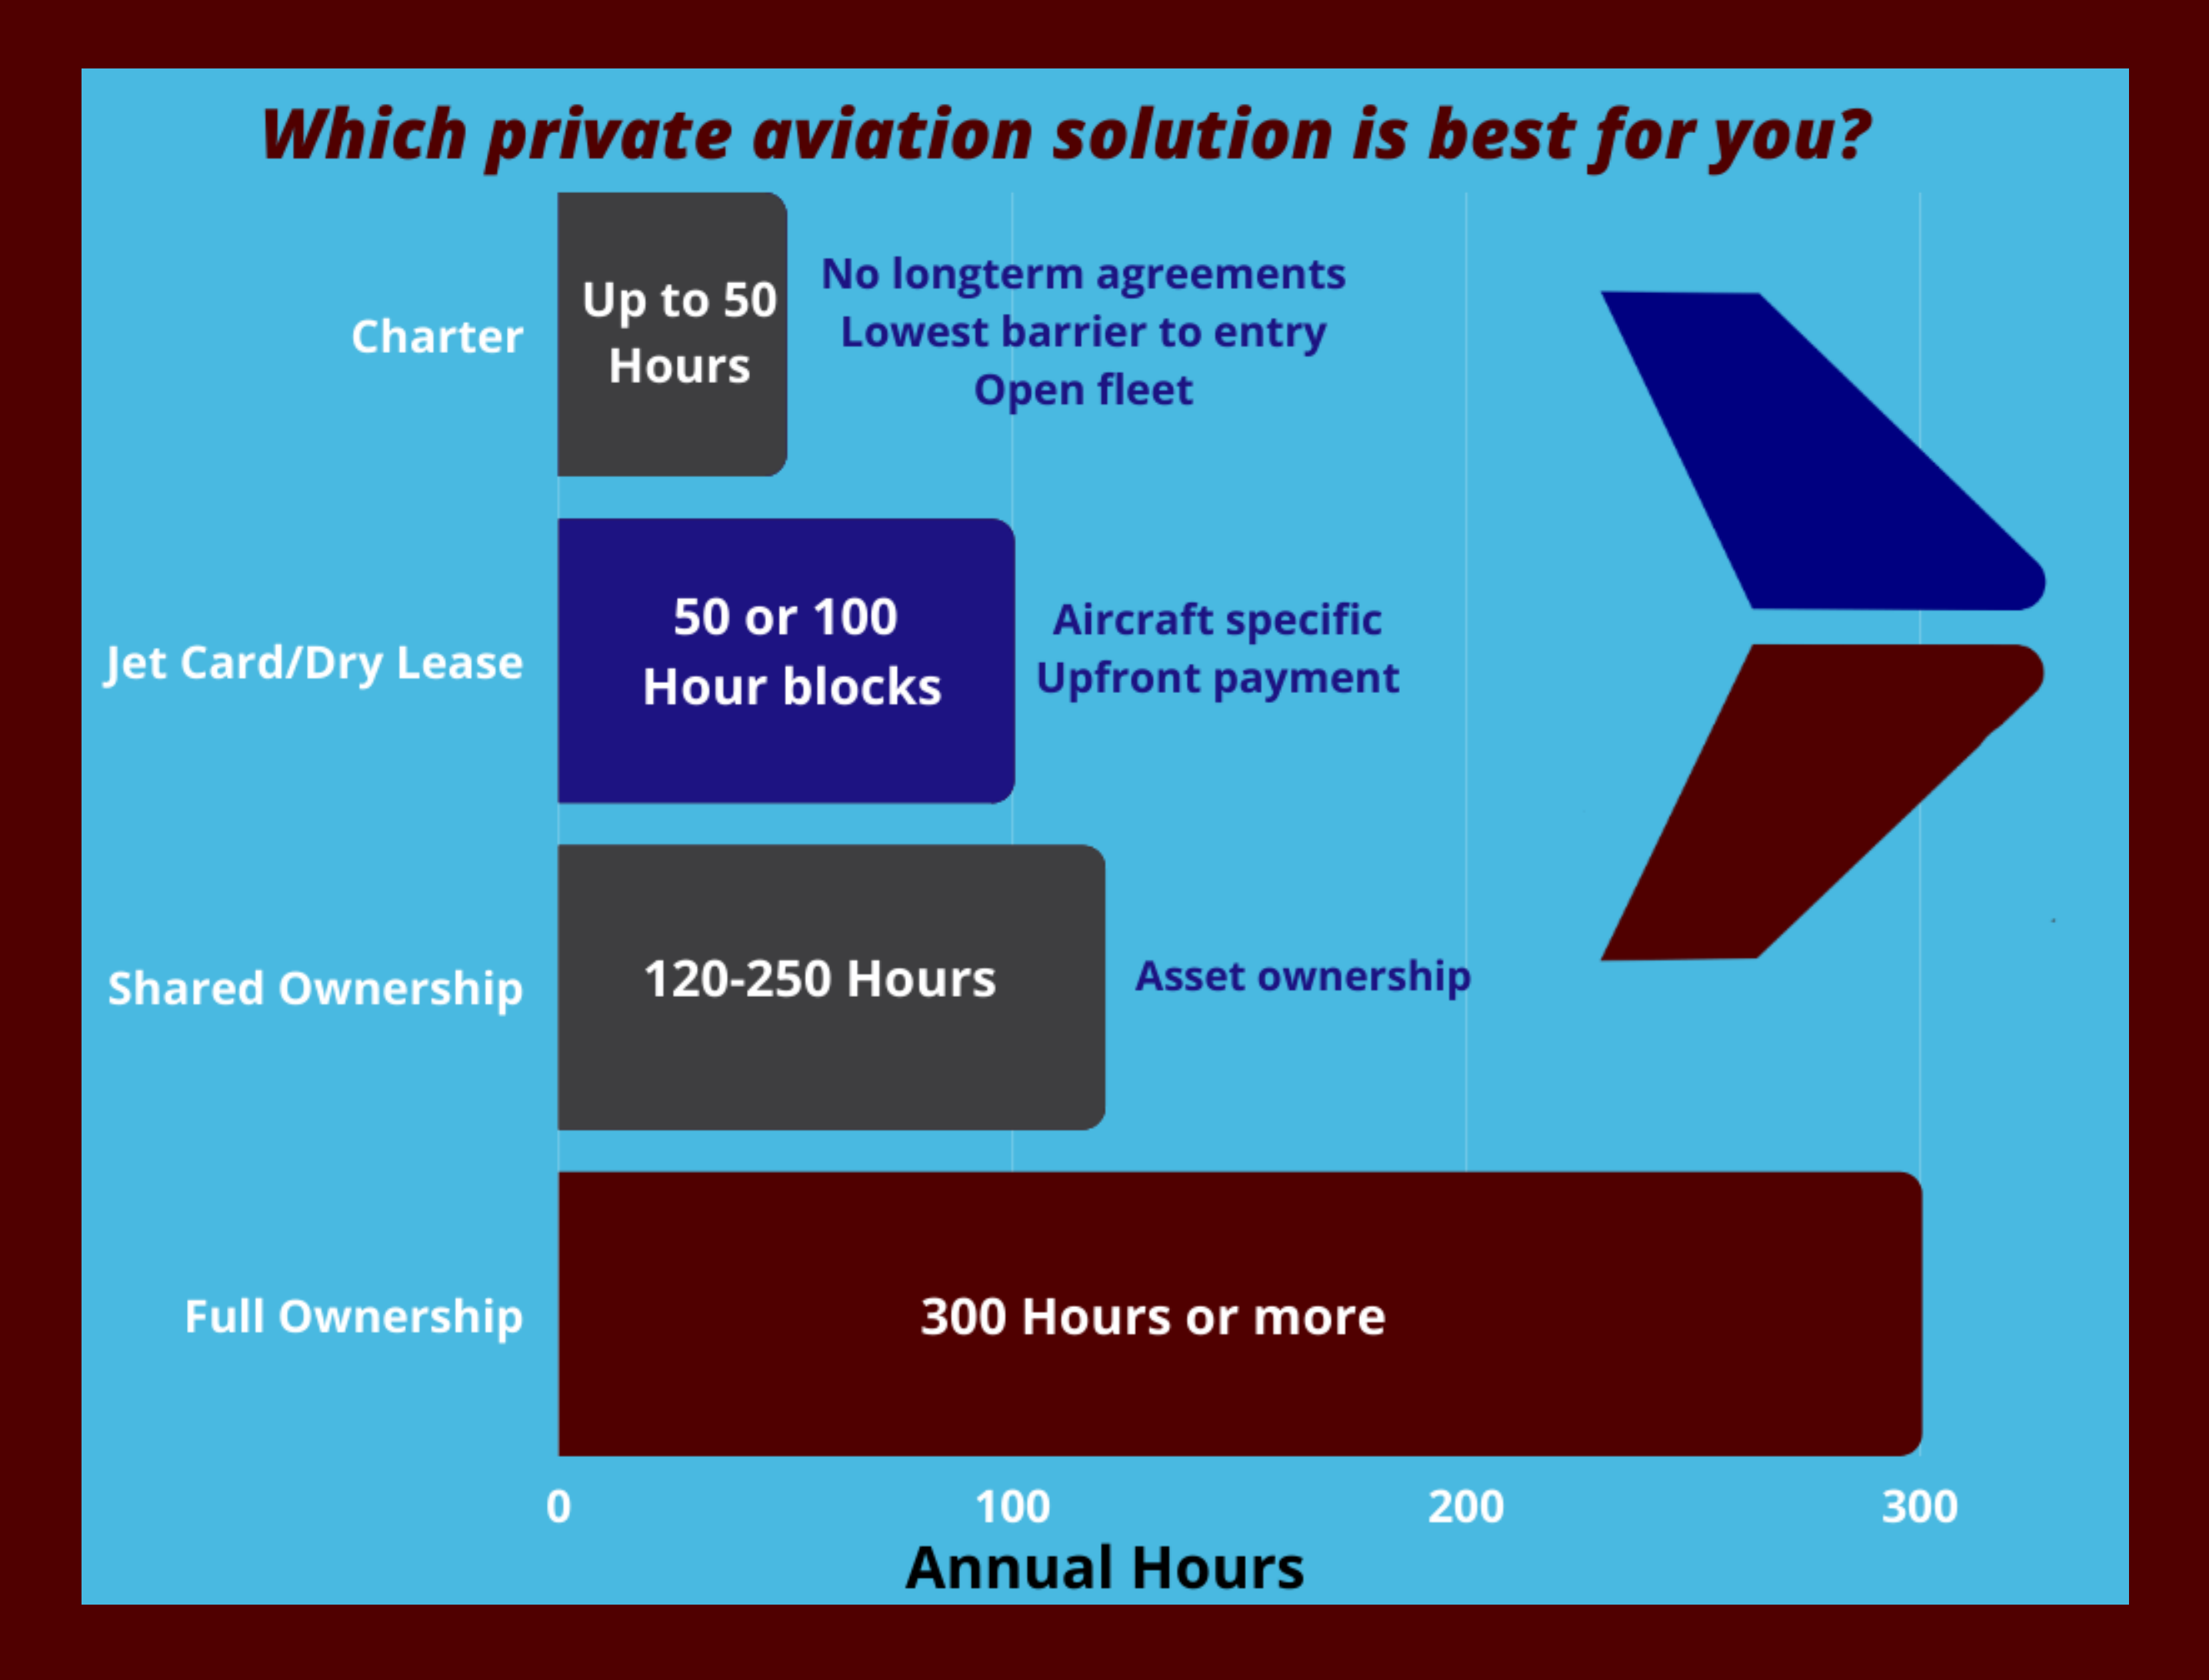 Best private avaition solution for you